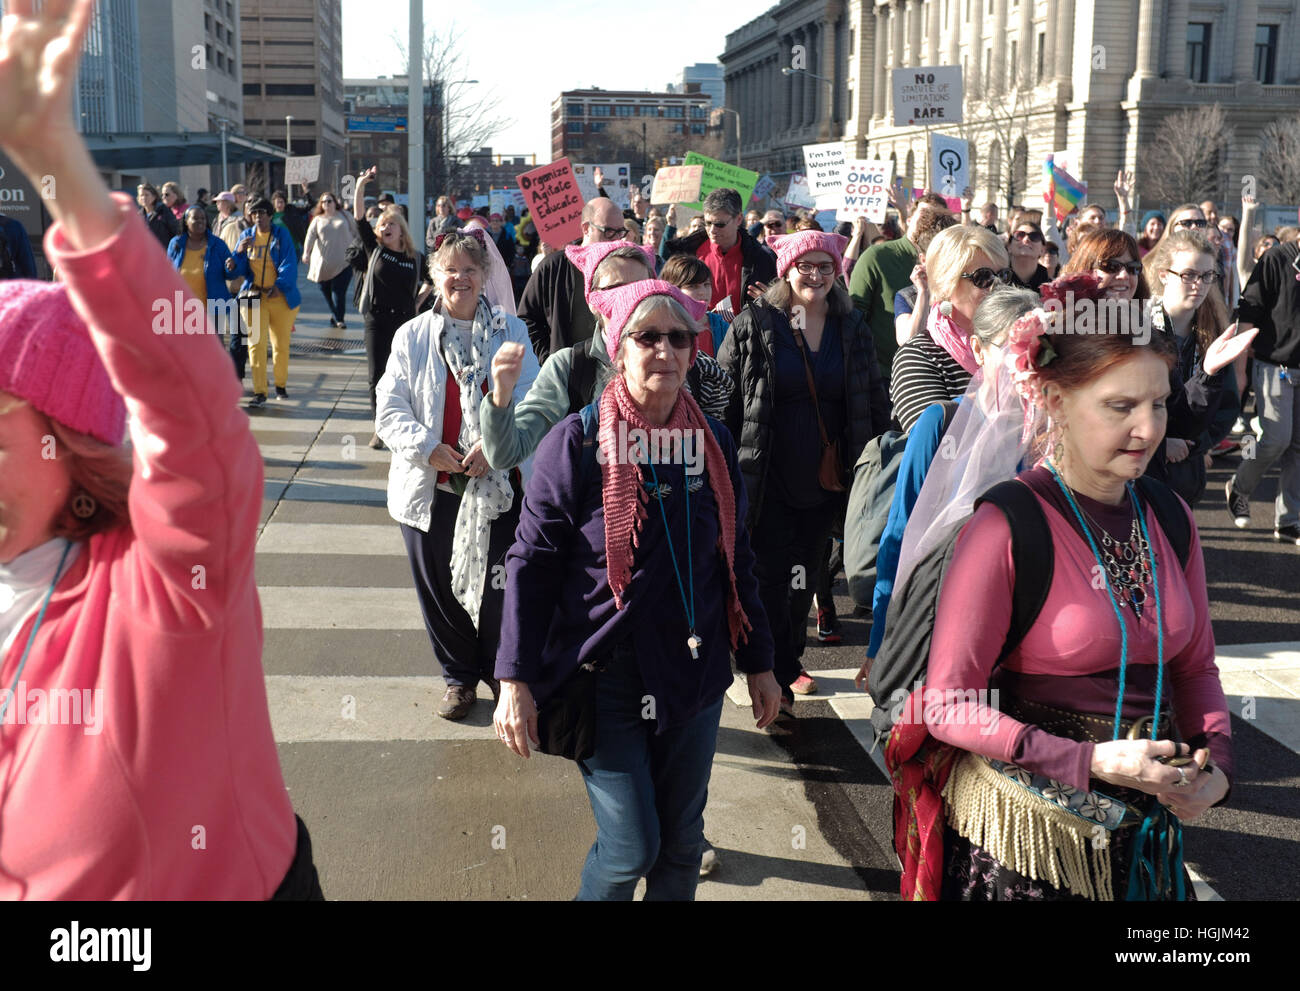 Cleveland, Ohio, United States, 21st January, 2017, Women walking down Lakeside Avenue in downtown Cleveland, Ohio, USA, in protest of curtailing women's rights.  Credit: Mark Kanning/Alamy Live News. Stock Photo